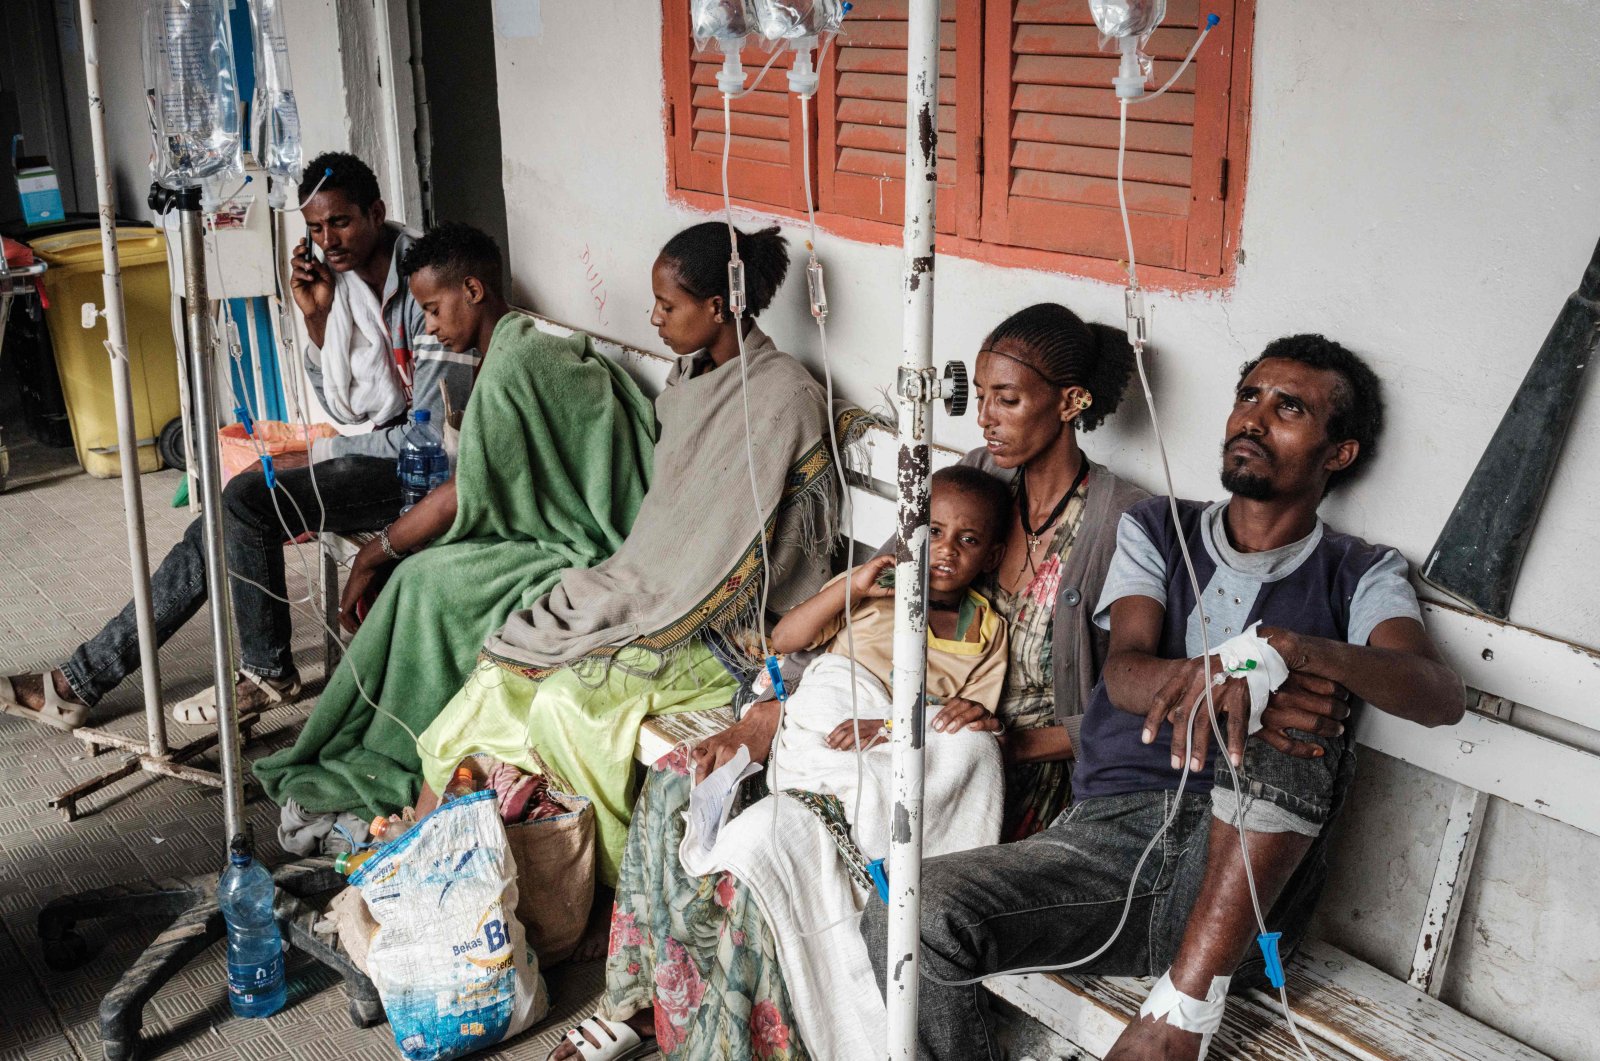 "Life could have been saved": Ethiopia's air strike